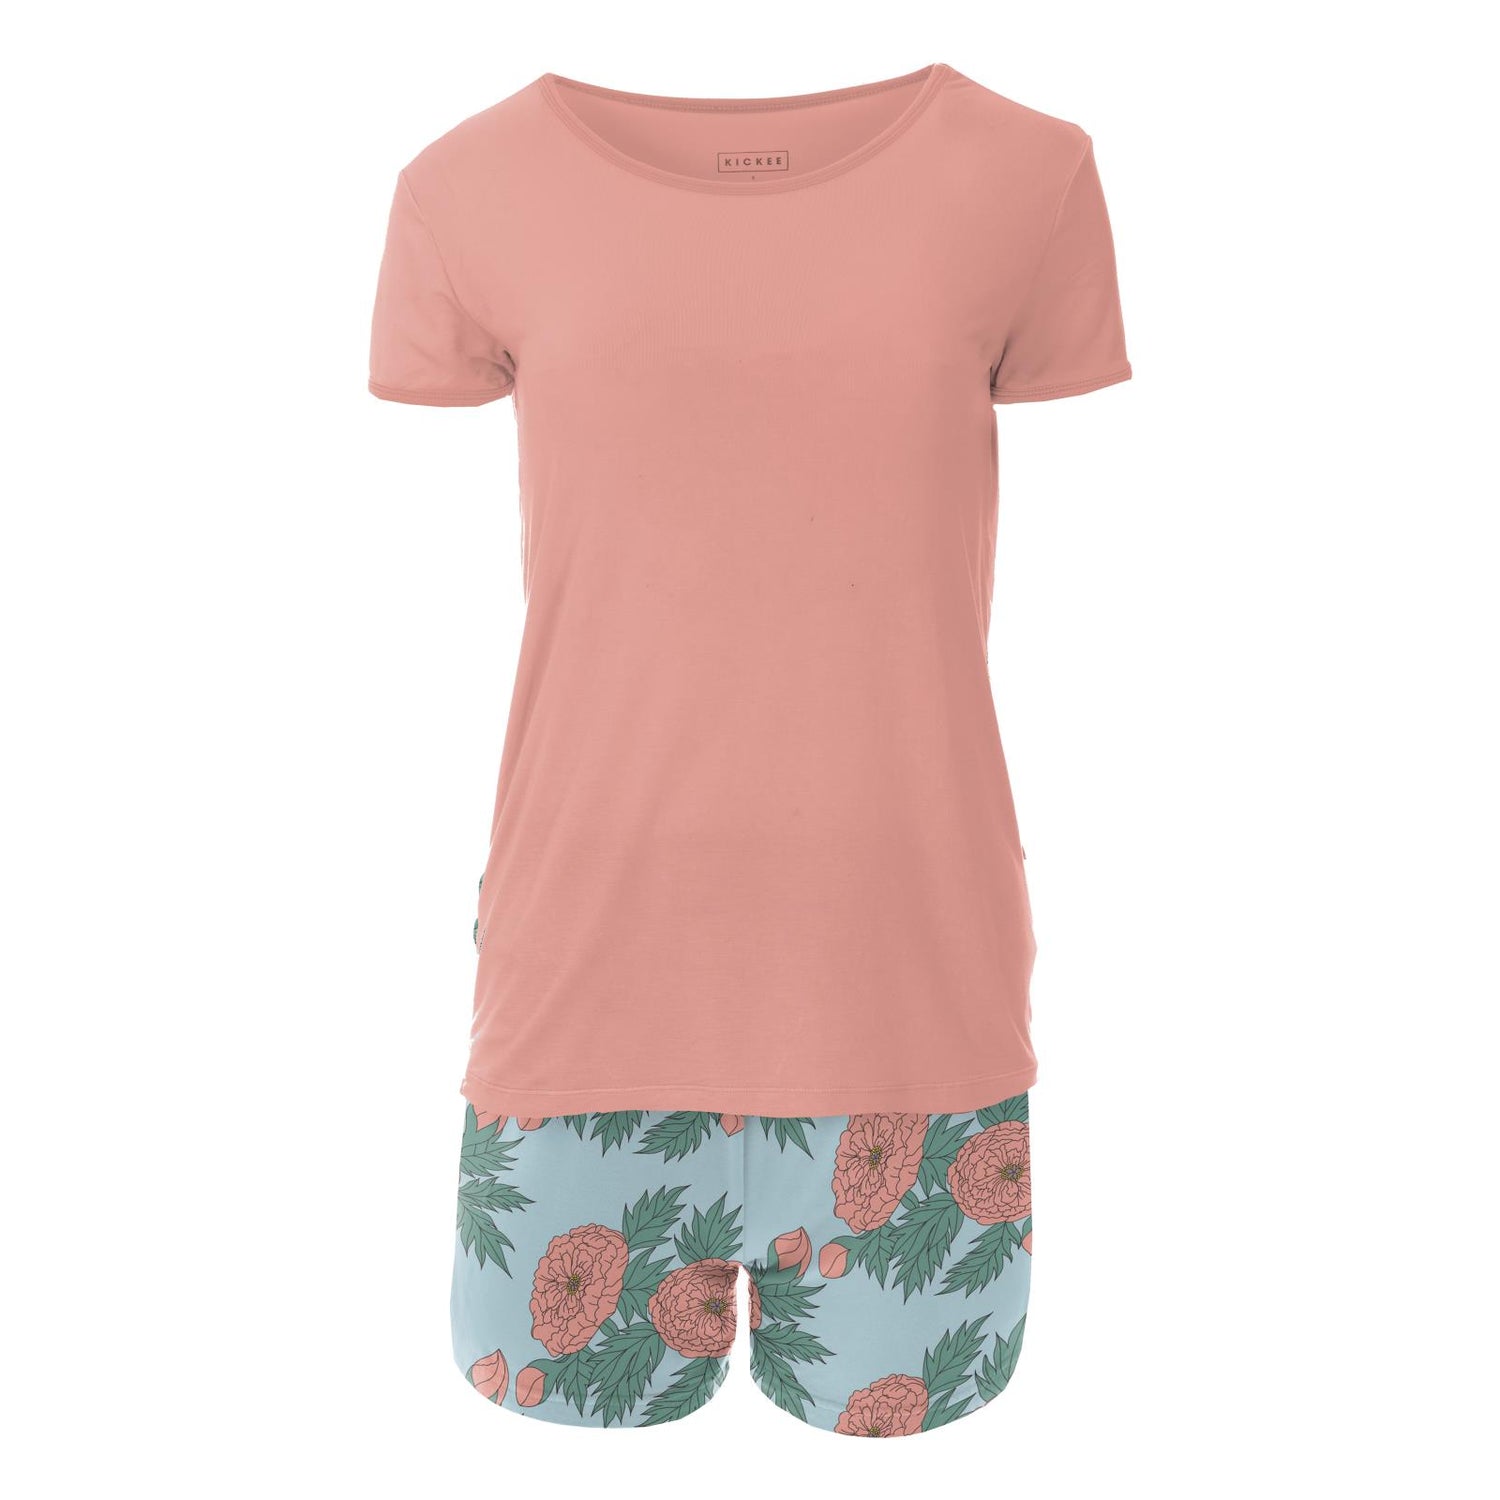 Women's Print Short Sleeve Fitted Pajama Set with Shorts in Spring Sky Floral